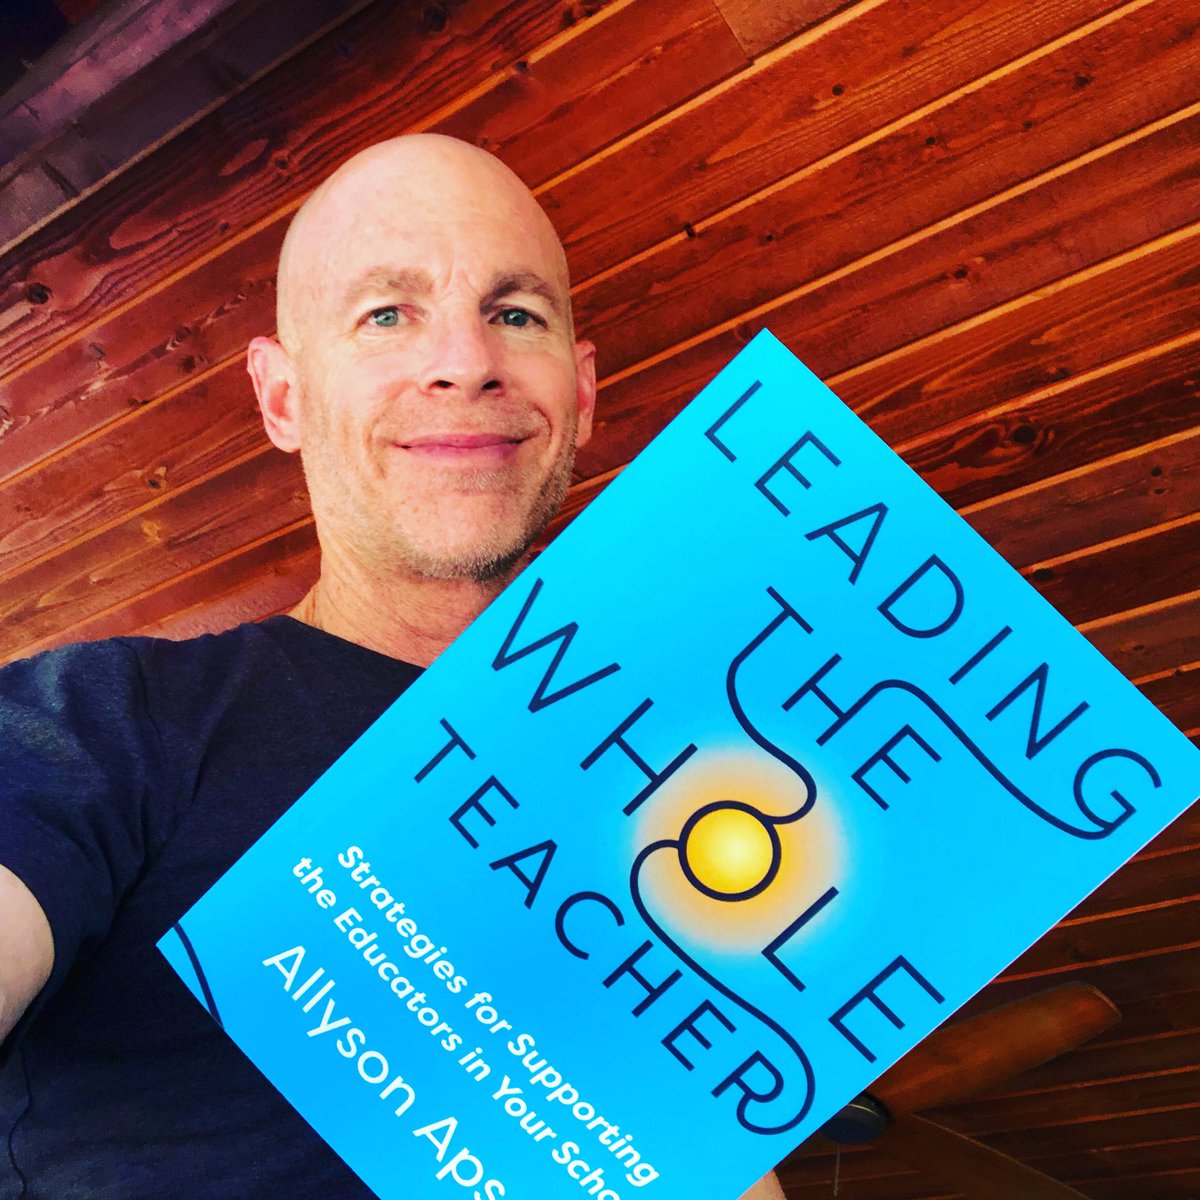 Listen to my #DaveBurgessShow conversation with @AllysonApsey here: 
thedaveburgessshow.buzzsprout.com/1635715/120668…
Then pick up her amazing book, #LeadingTheWholeTeacher, here!
amazon.com/Leading-Whole-…
#dbcincbooks #LeadLAP #tlap